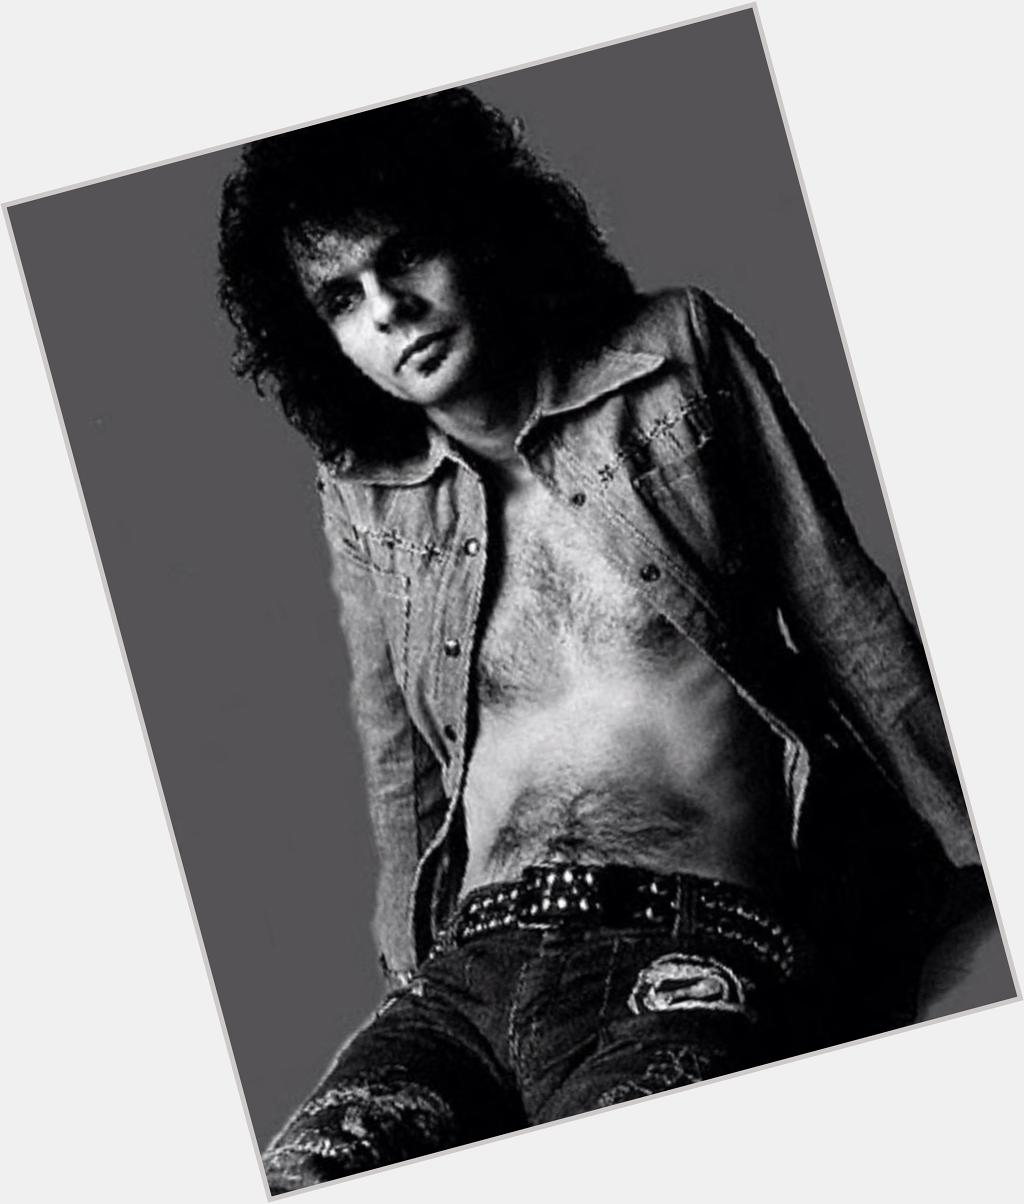 2/5/1944 Happy Birthday, Al Kooper, influential guitarist, producer and bandleader, founded Blood, Sweat & Tears 